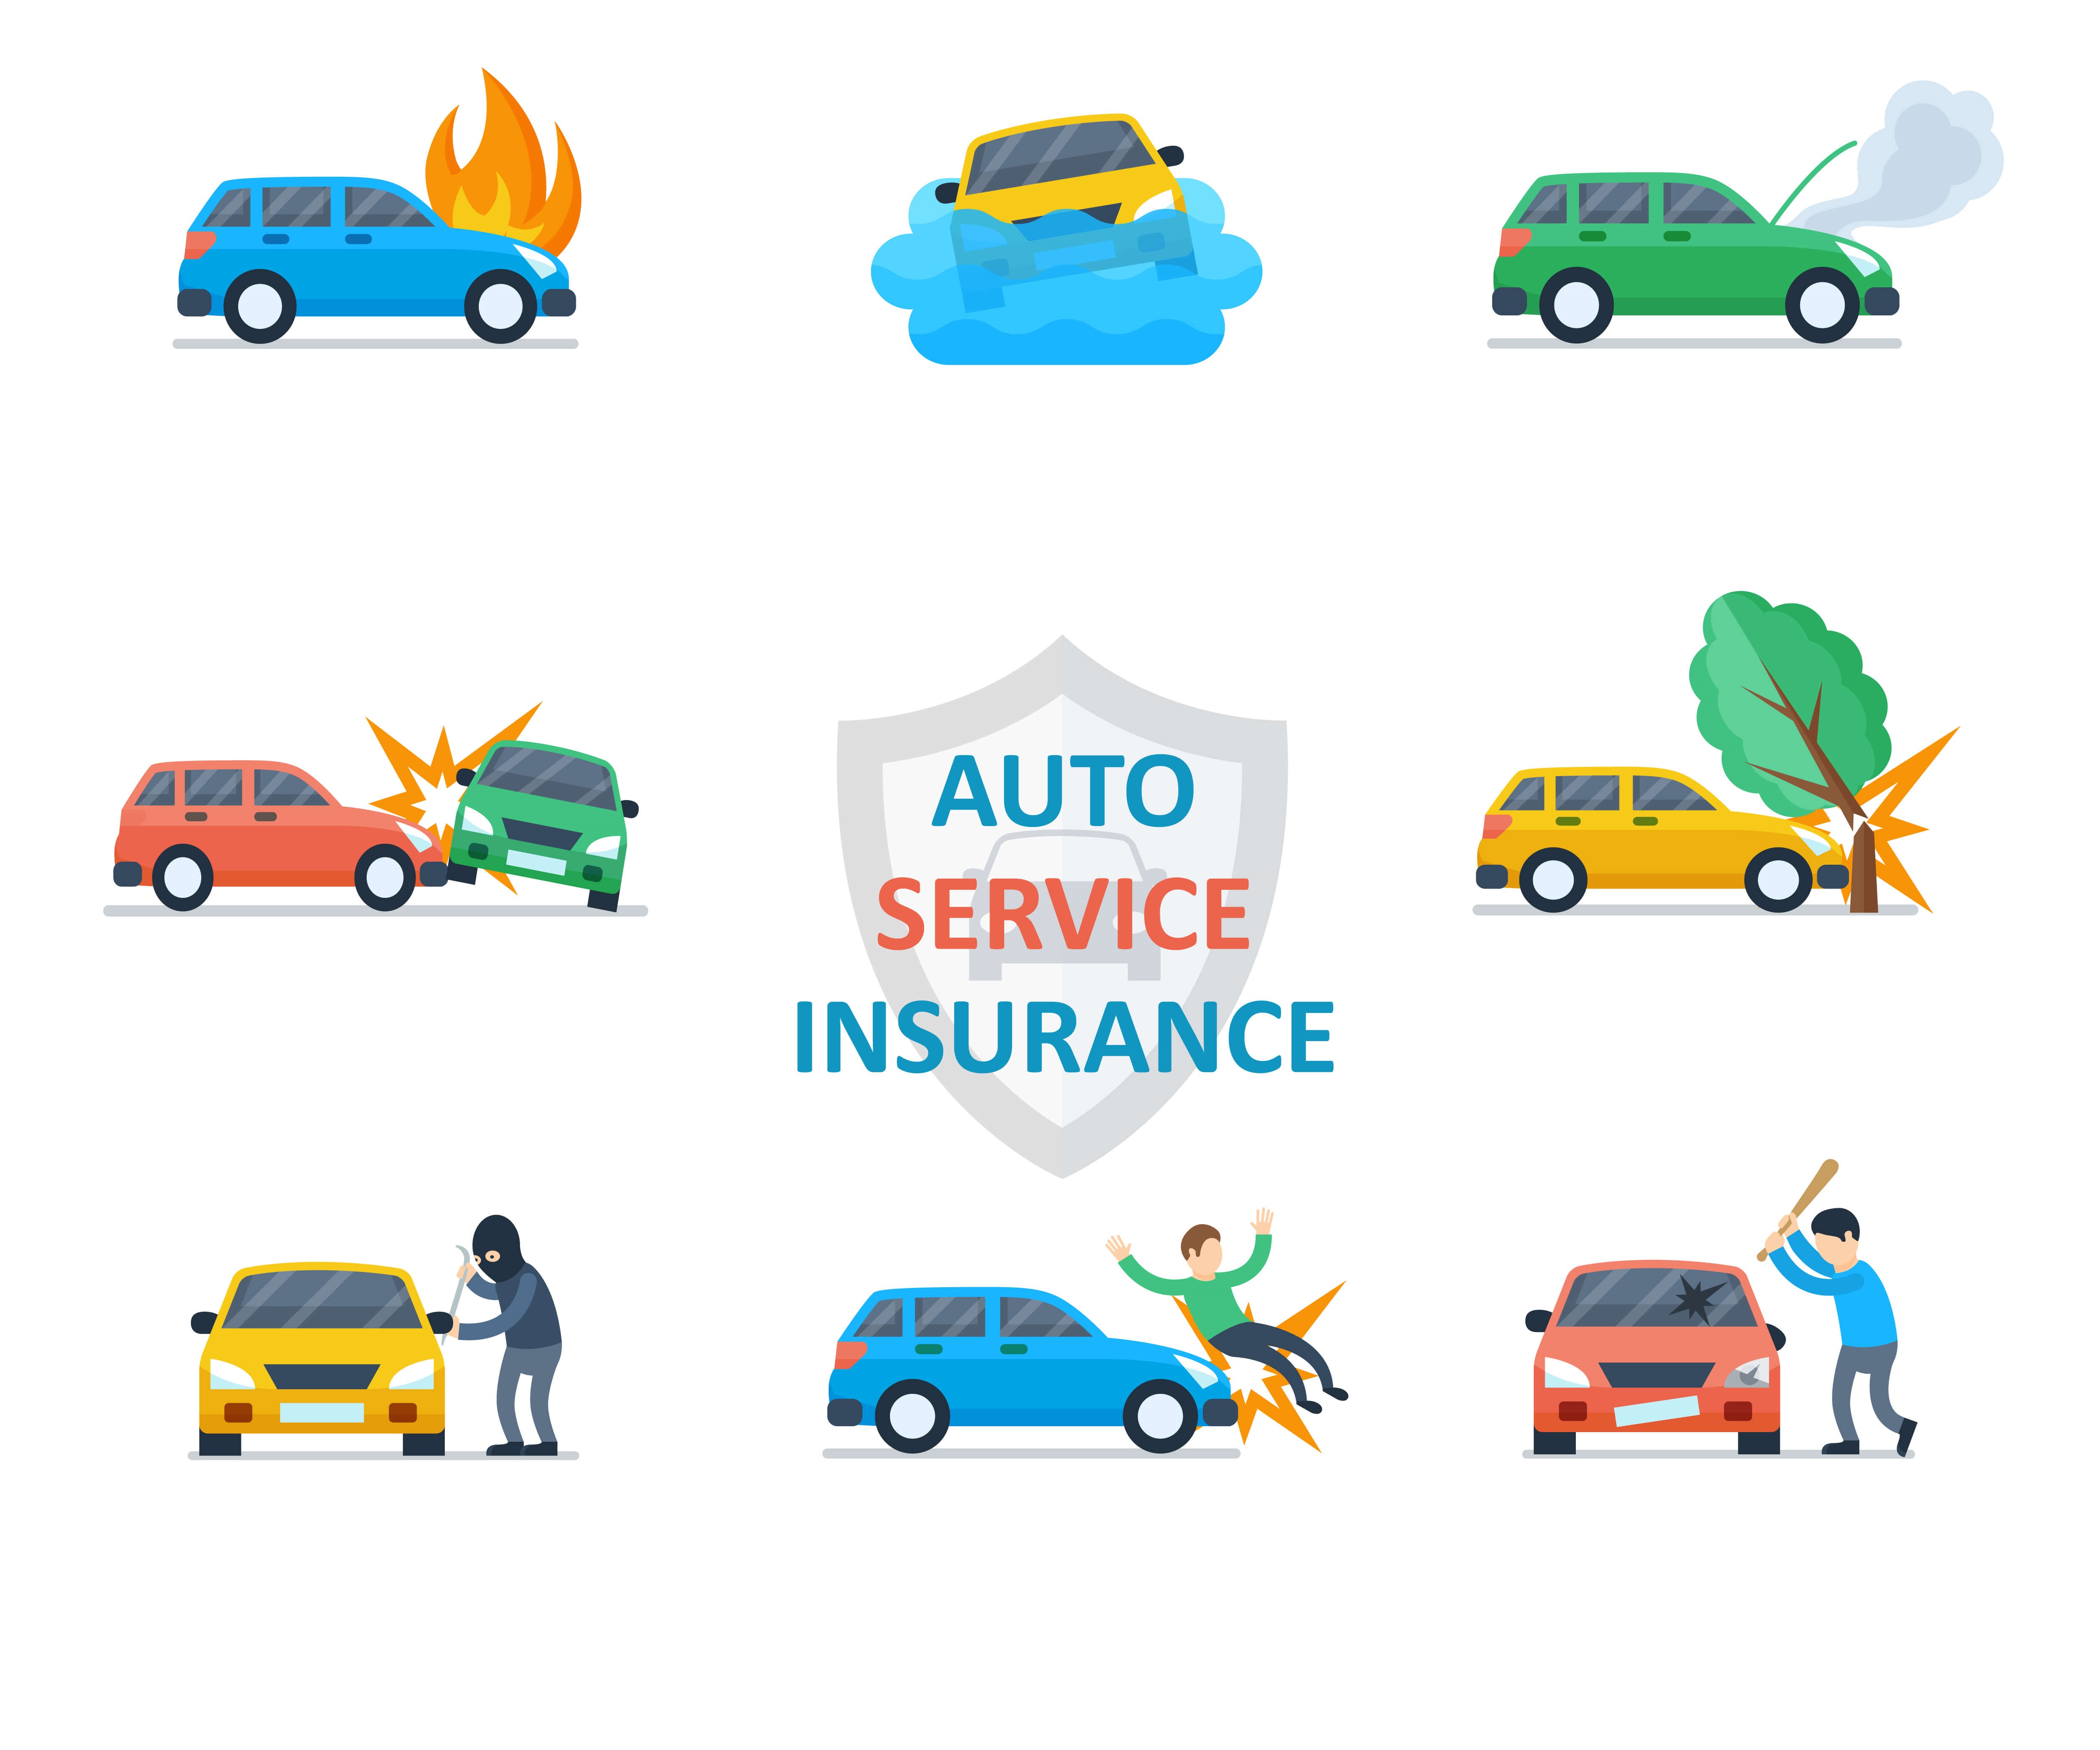 Key Protections Offered By Standard Auto Insurance Policies